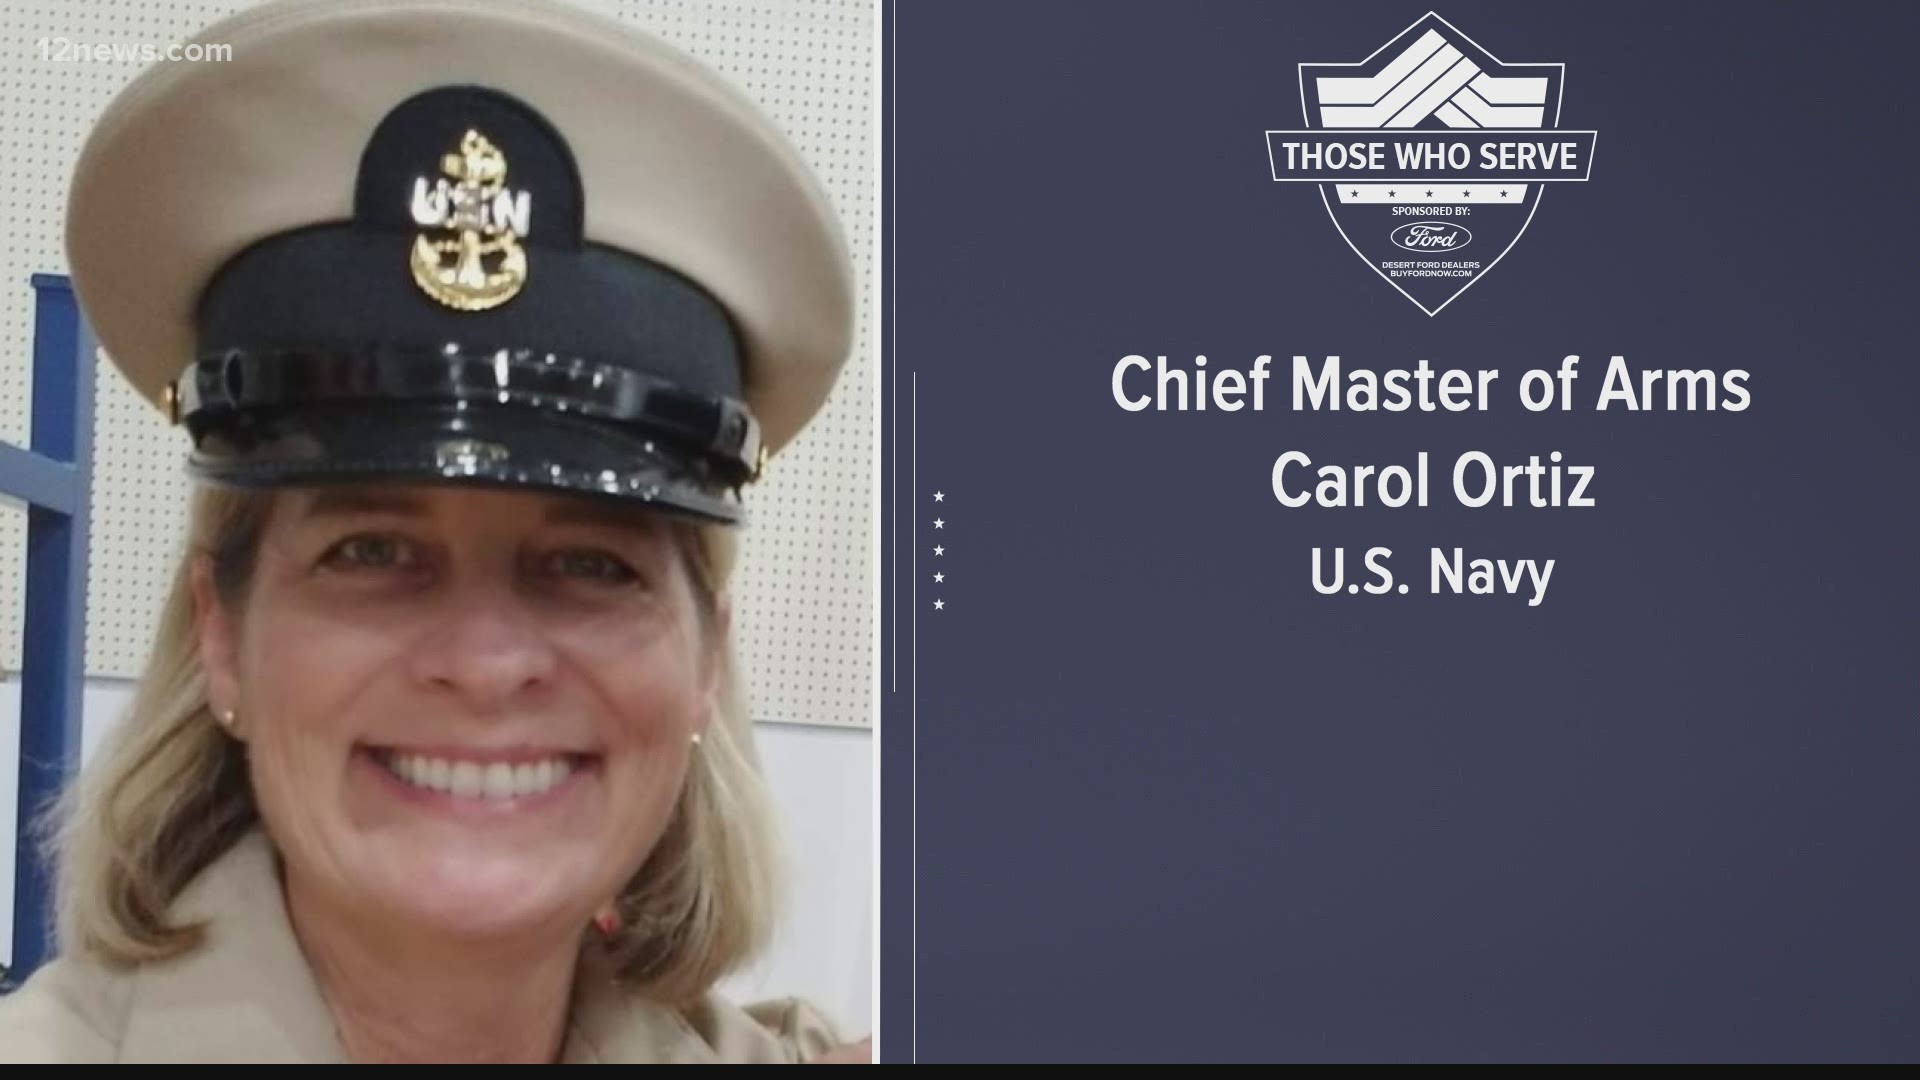 12 News is honoring Those Who Serve. This is Chief Master of Arms Carol Ortiz. She's a proud member of the U.S. Navy.